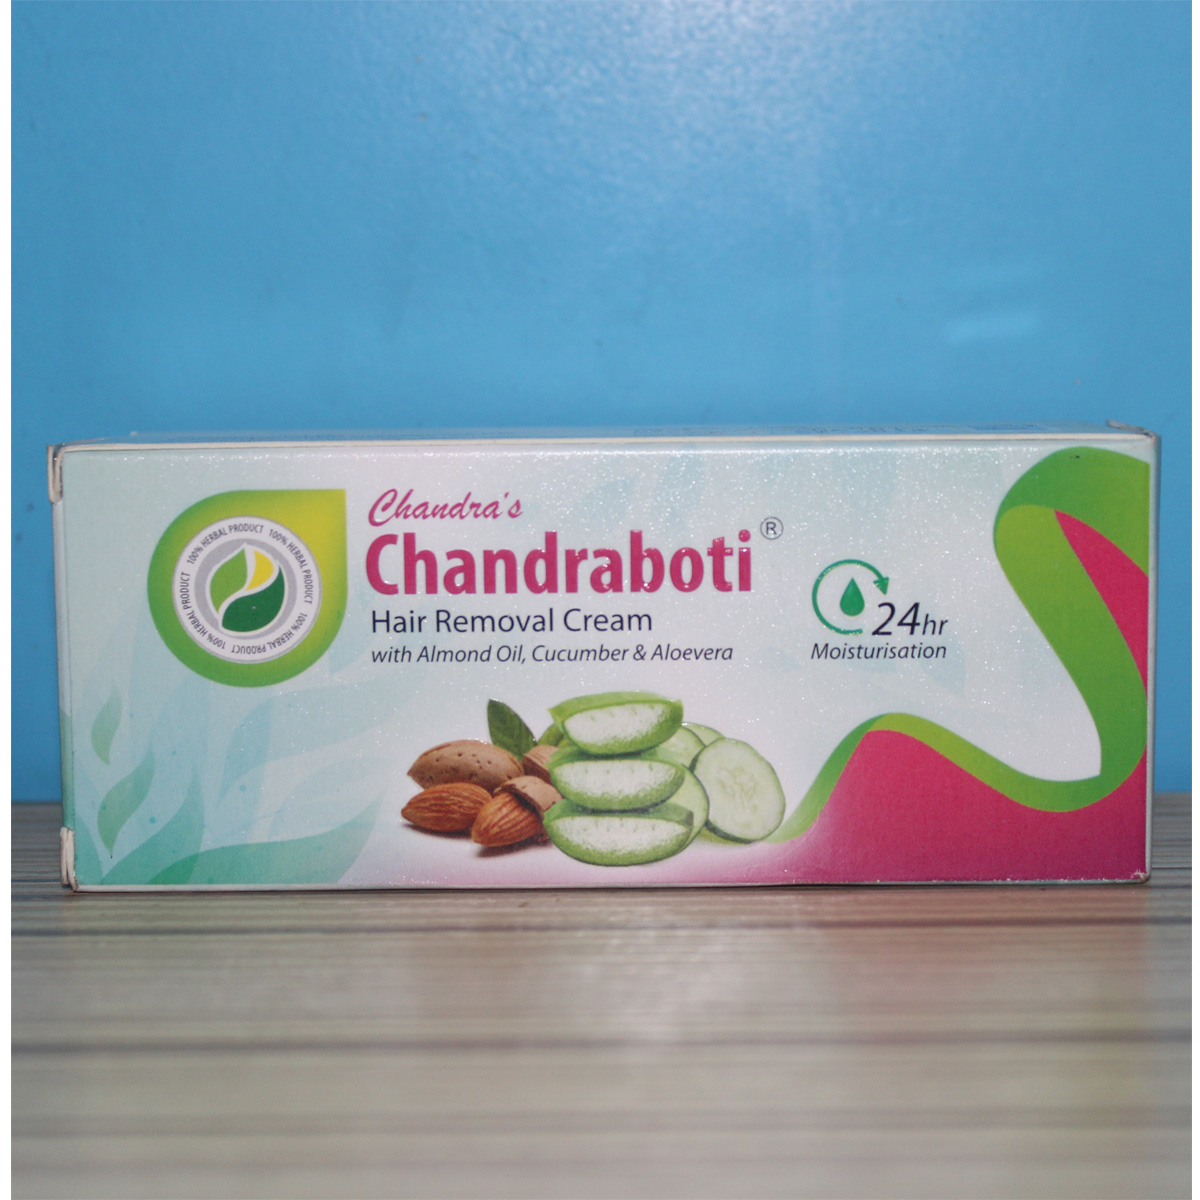 Bengal Shopping - One Life to Live - One Store to Shop | Chandraboti Hair  Remover Cream